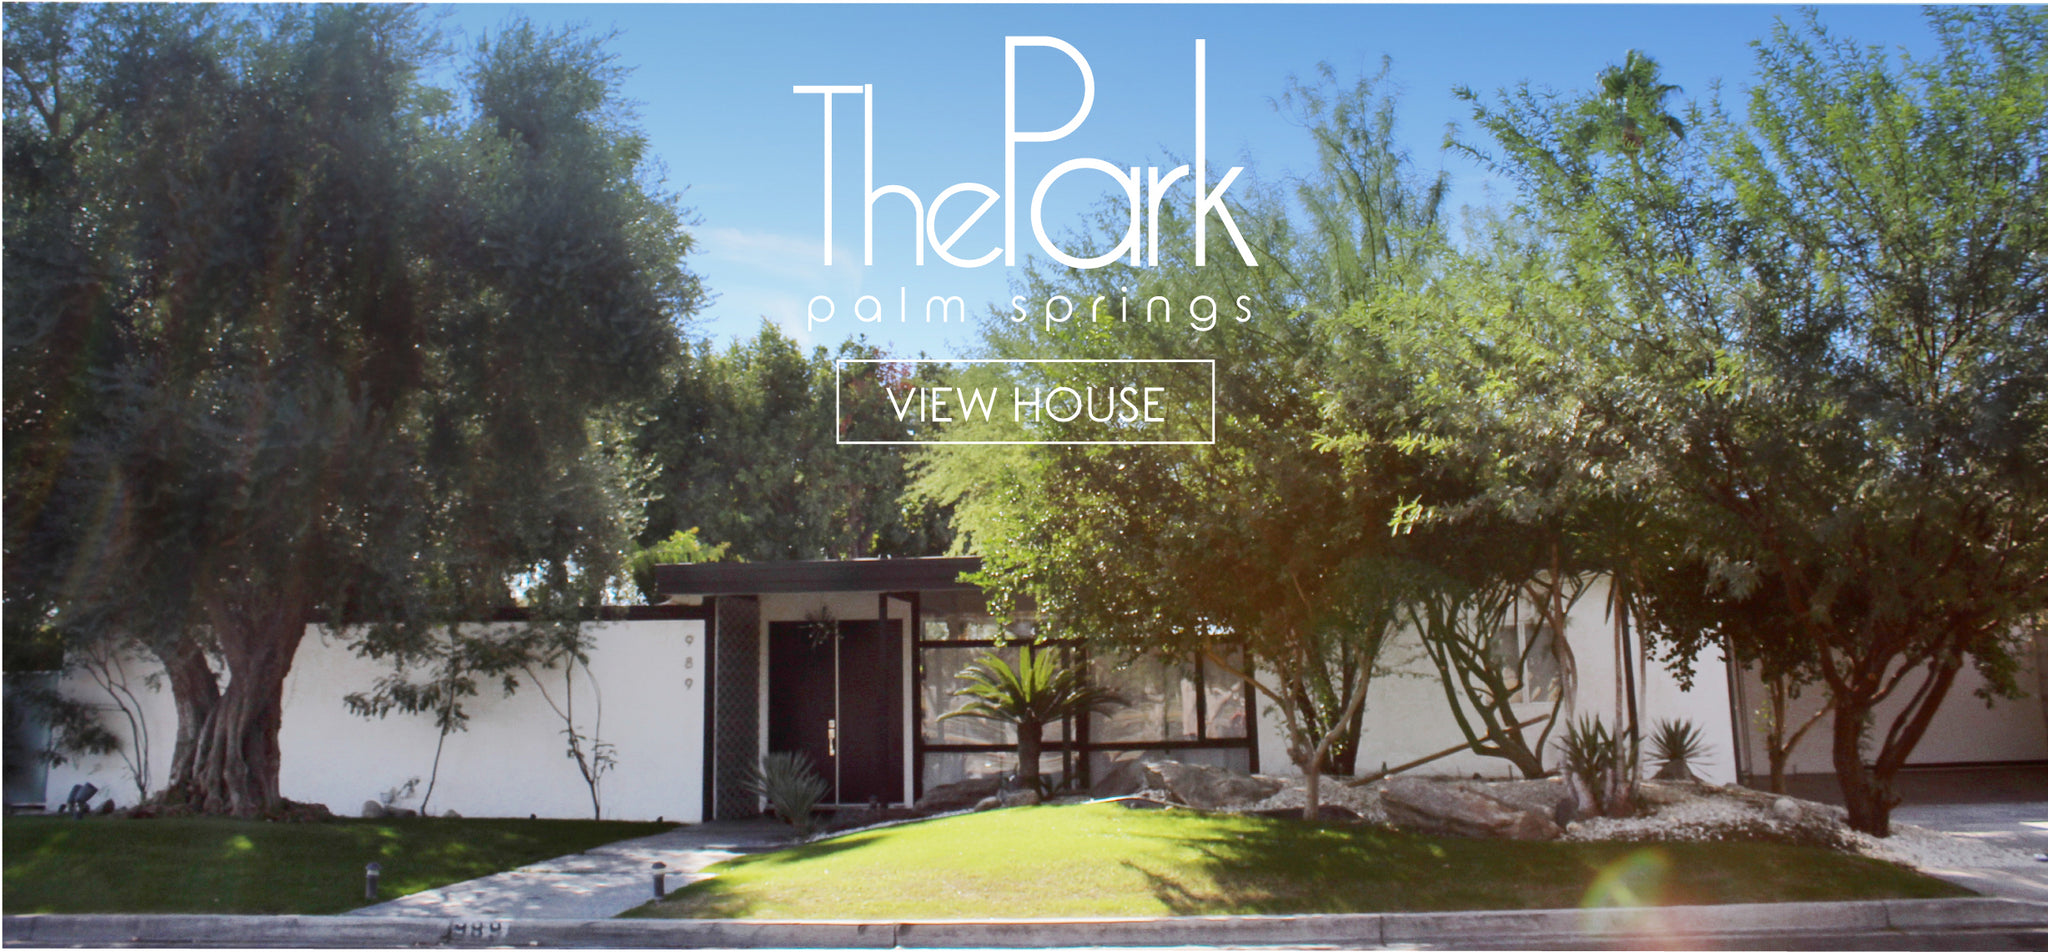 Front of one-story white house with dark trim and trees. 'The Park Palm Springs' and 'View the House' in white print overlay